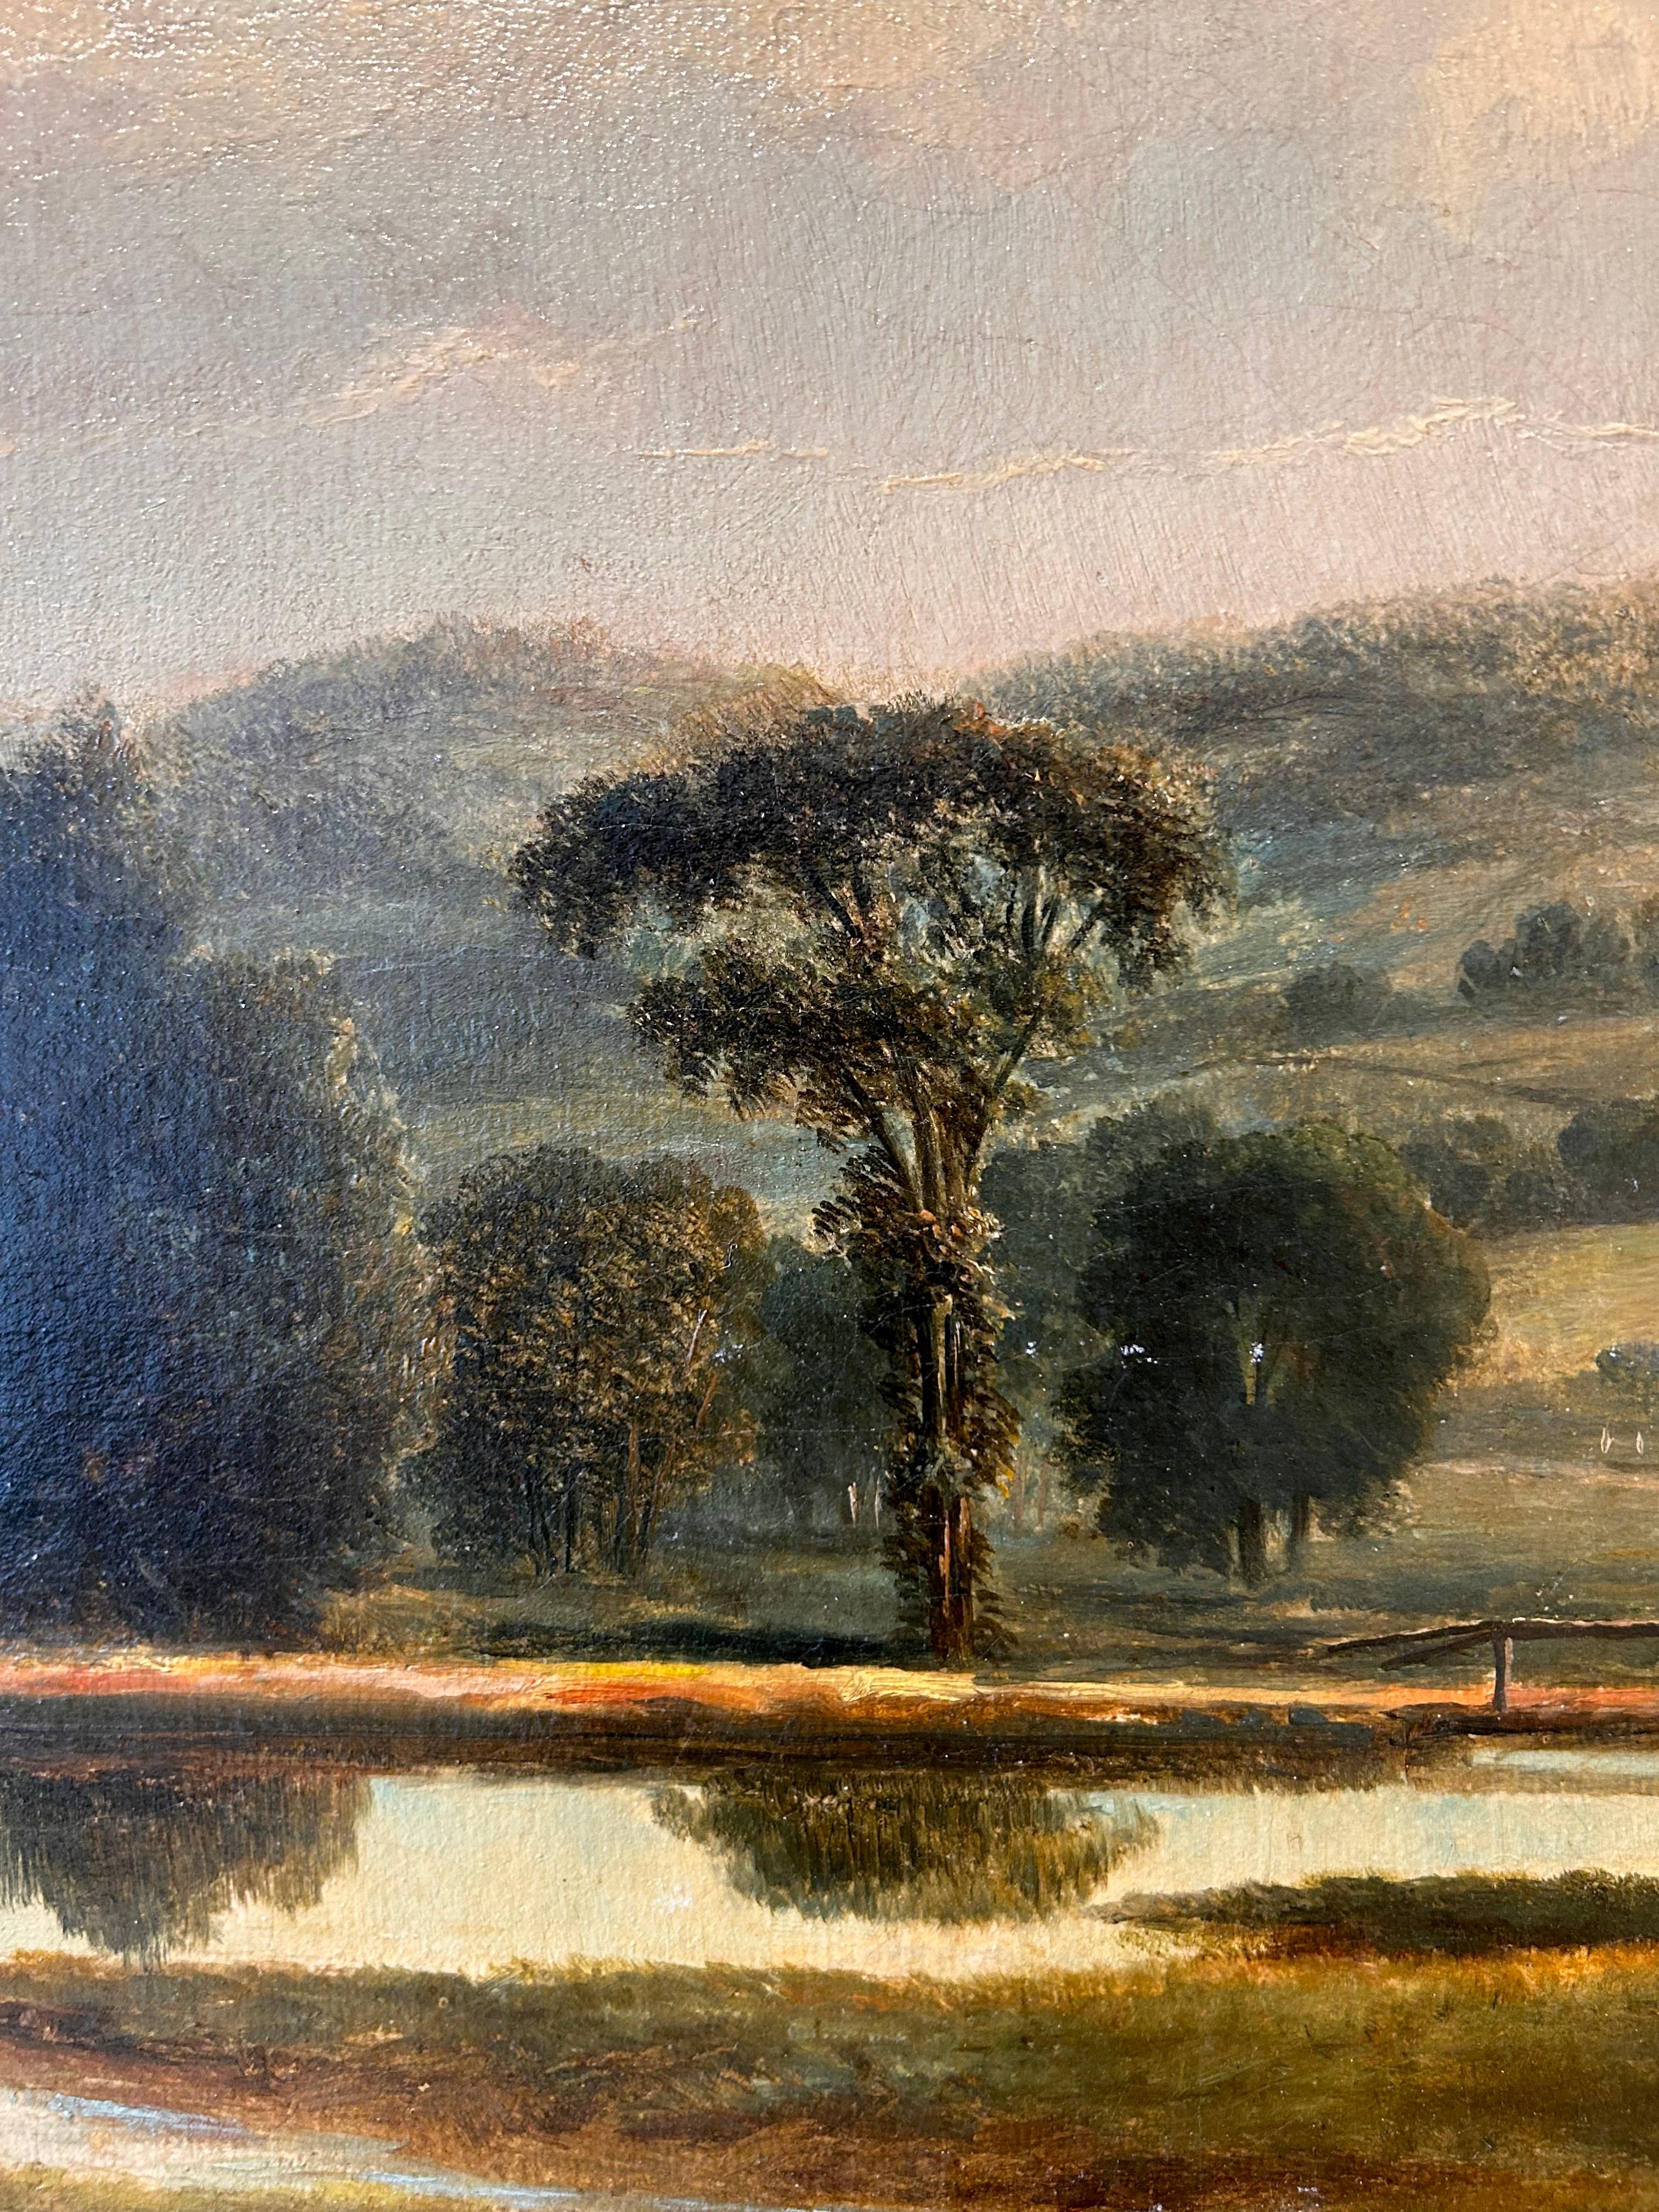 Joseph Antonio Hekking was a landscape and marine painter born in 1830 in the Netherlands and died in New York in 1903. He studied in Paris and was a talented draftsman who lived in Cherry Valley, NY, Hartford, CT, Detroit, MI, and Washington, D.C.